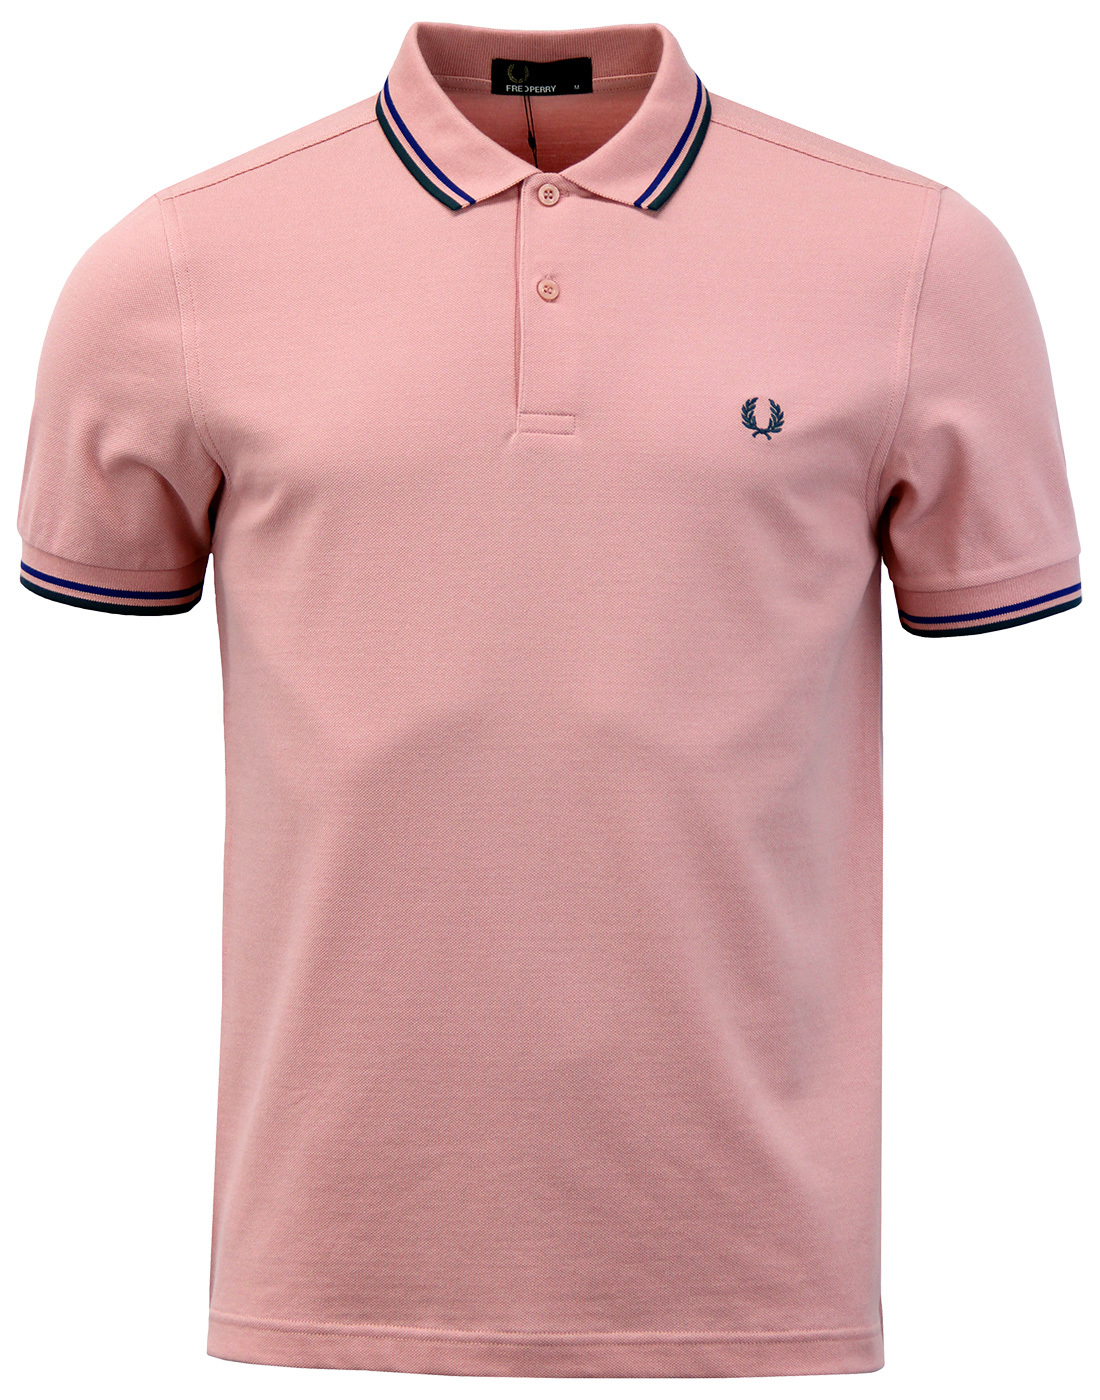 FRED PERRY M3600 Mod Twin Tipped Polo Shirt - PINK